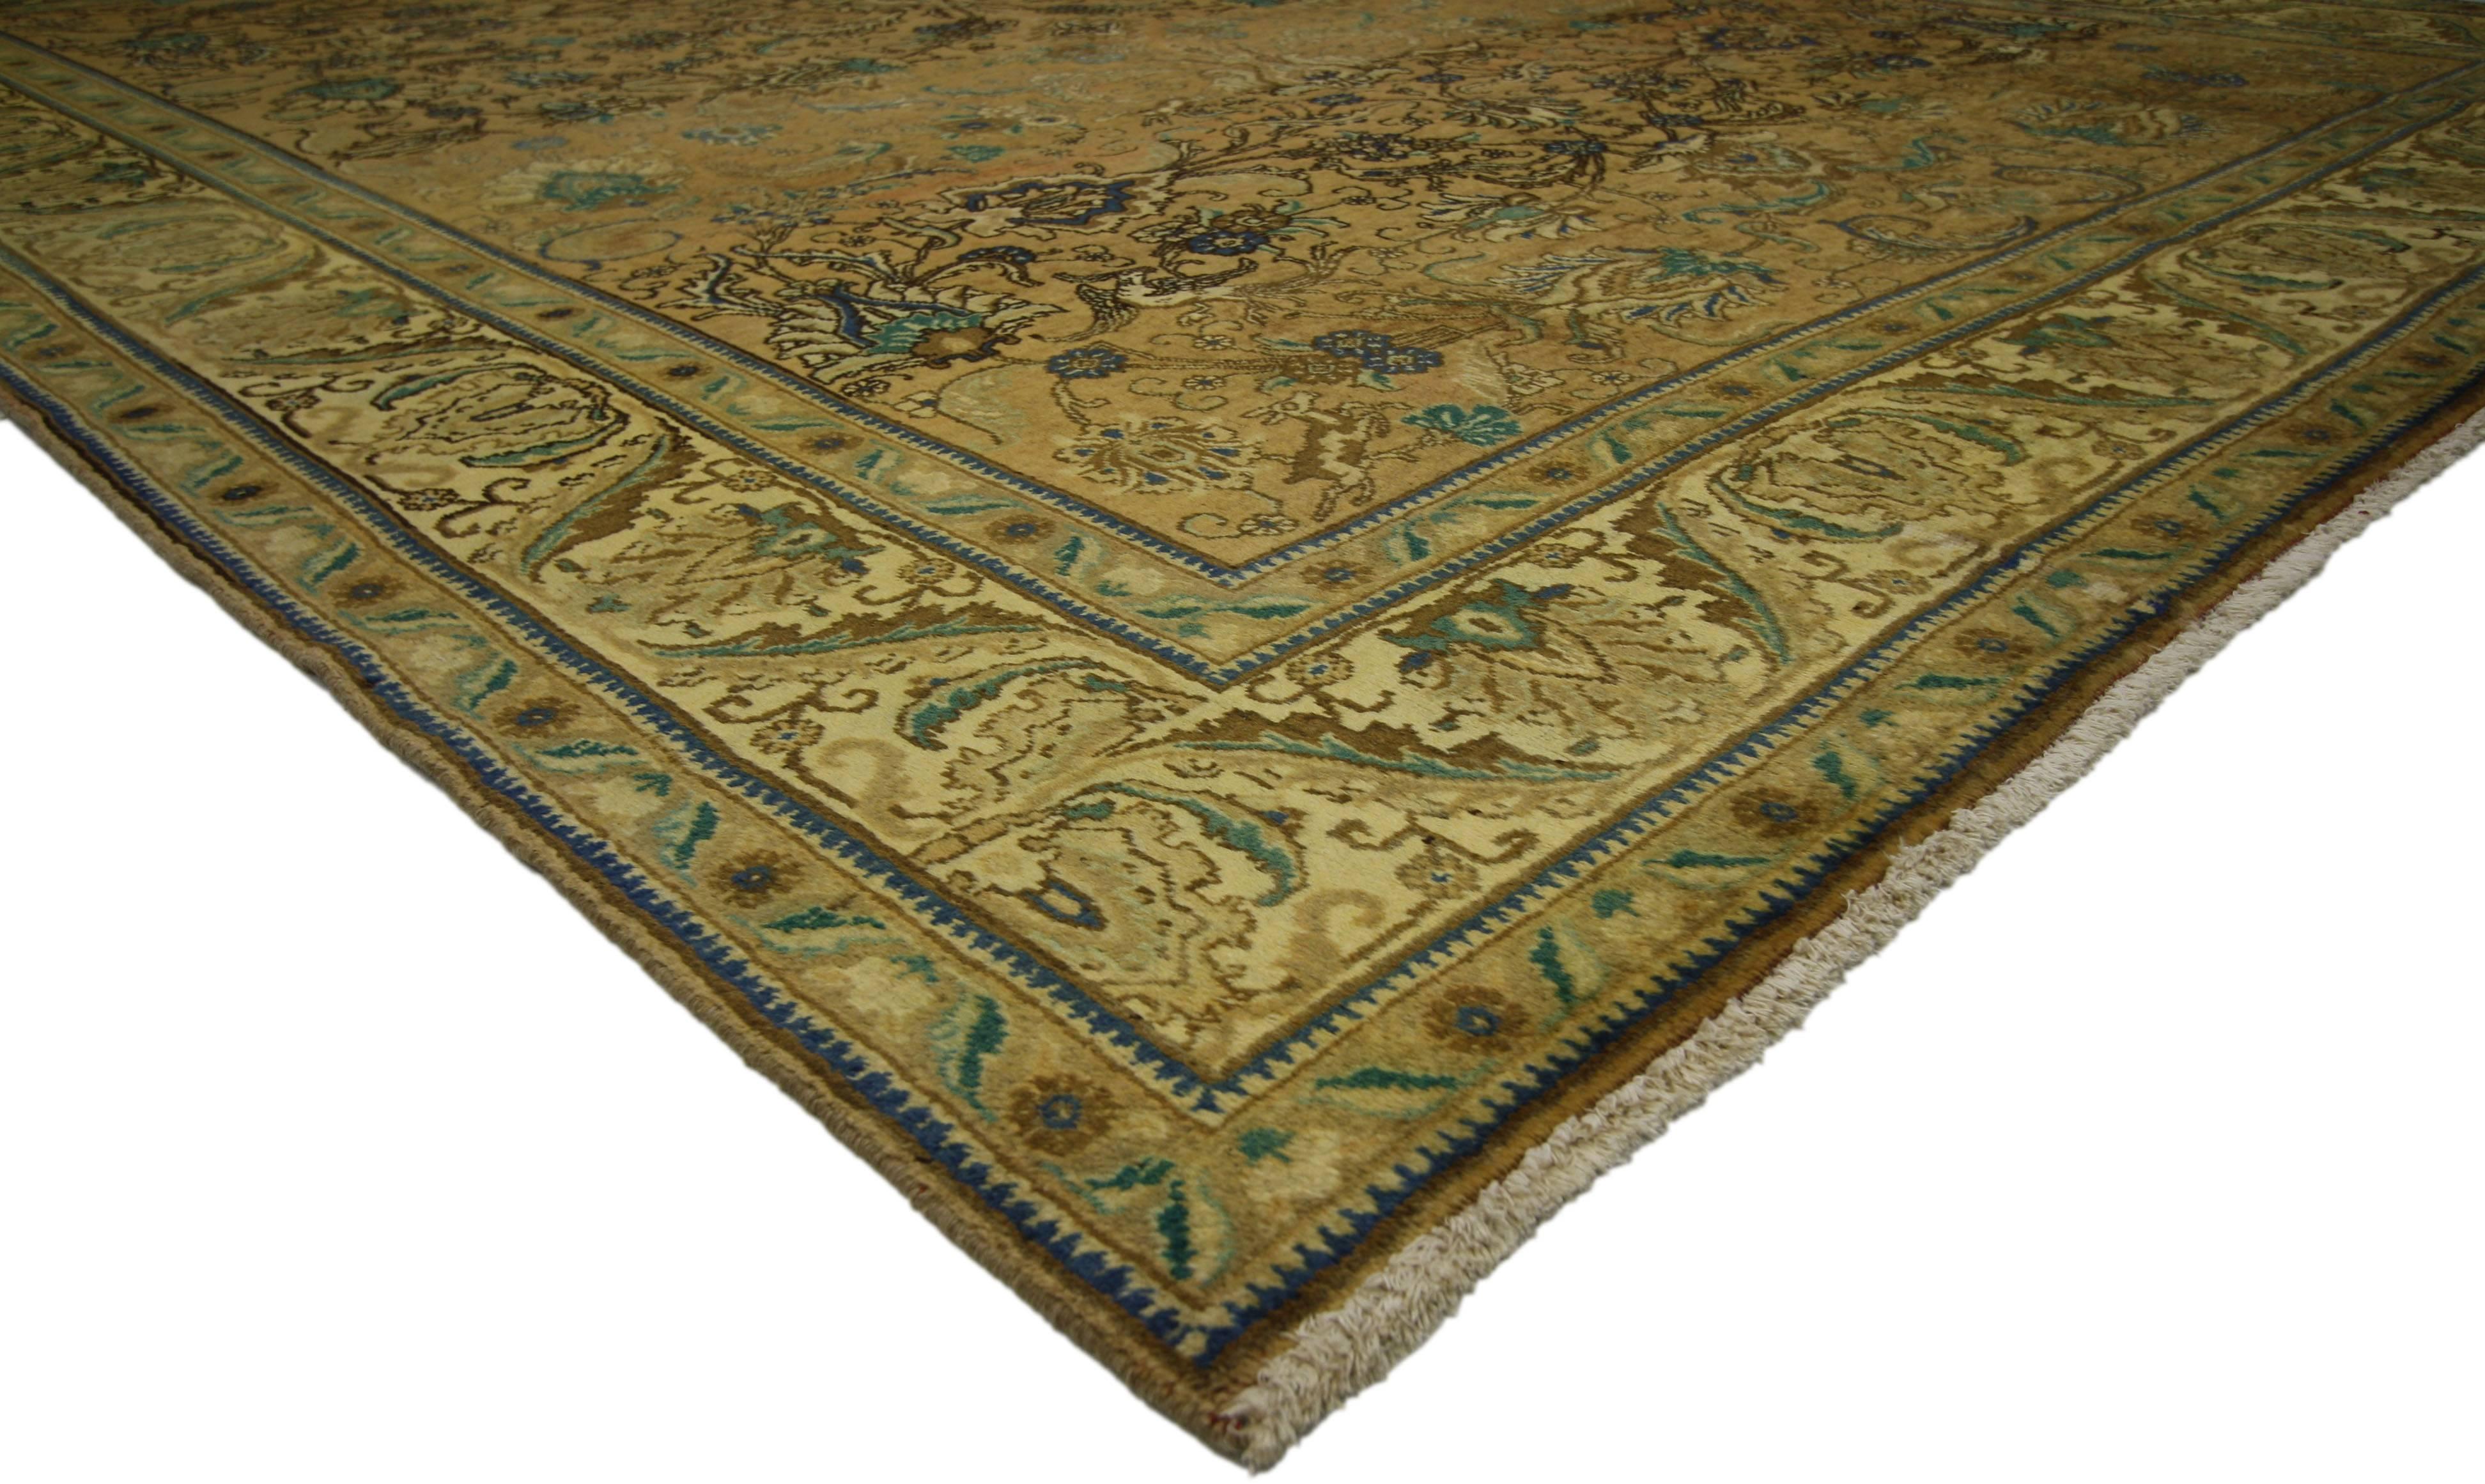 76328, vintage Persian Tabriz rug with traditional style. This hand-knotted wool vintage Persian Tabriz rug features an all-over pattern surrounded by a Classic border creating a well-balanced and timeless design. This vintage Persian Tabriz rug